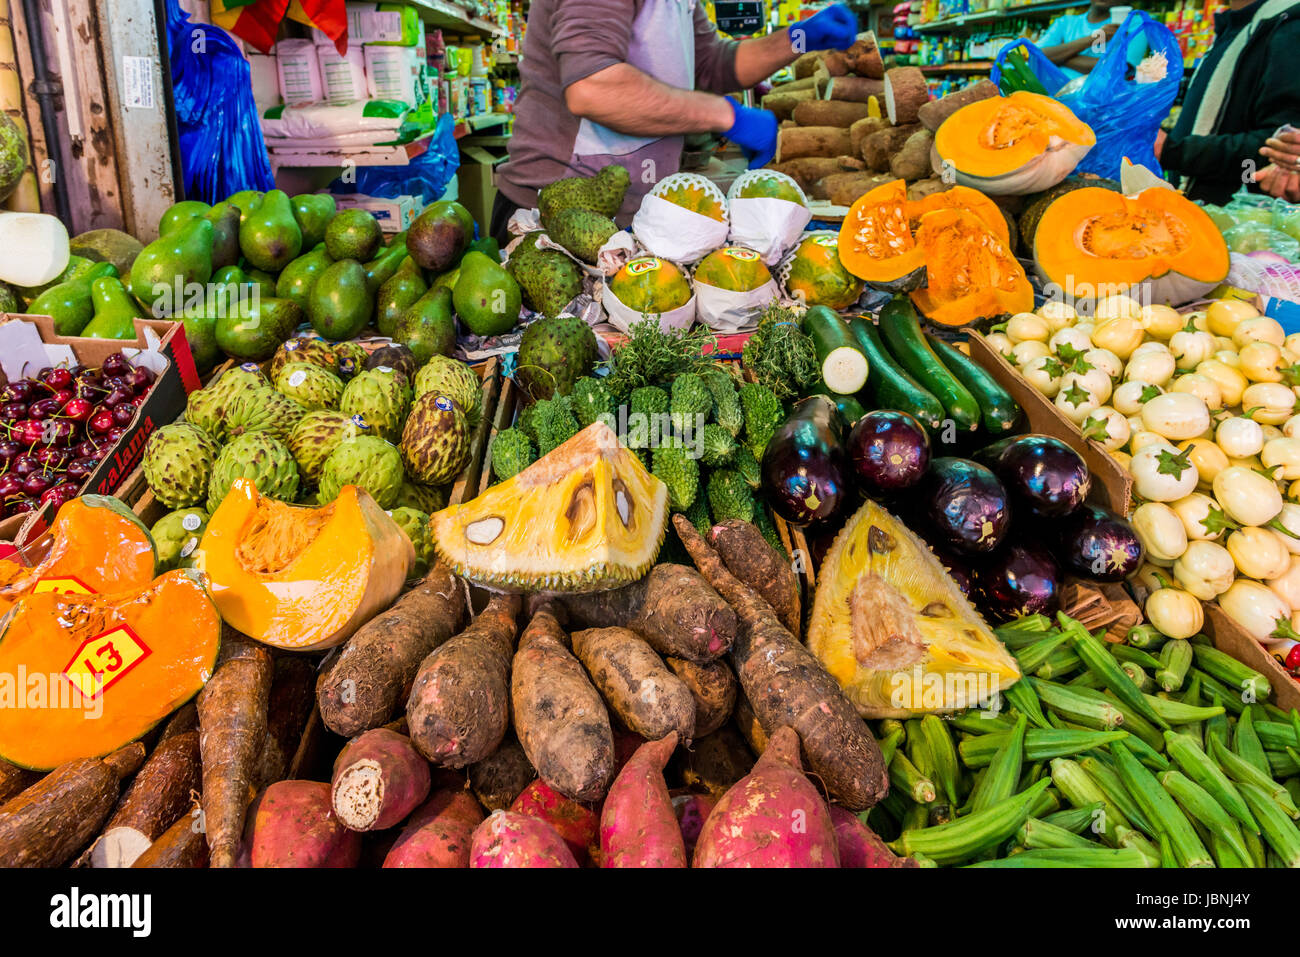 London, United Kingdom - June 10, 2017: Brixton Market - Colorful and multicultural community market run by local traders in South London. Fruits and  Stock Photo